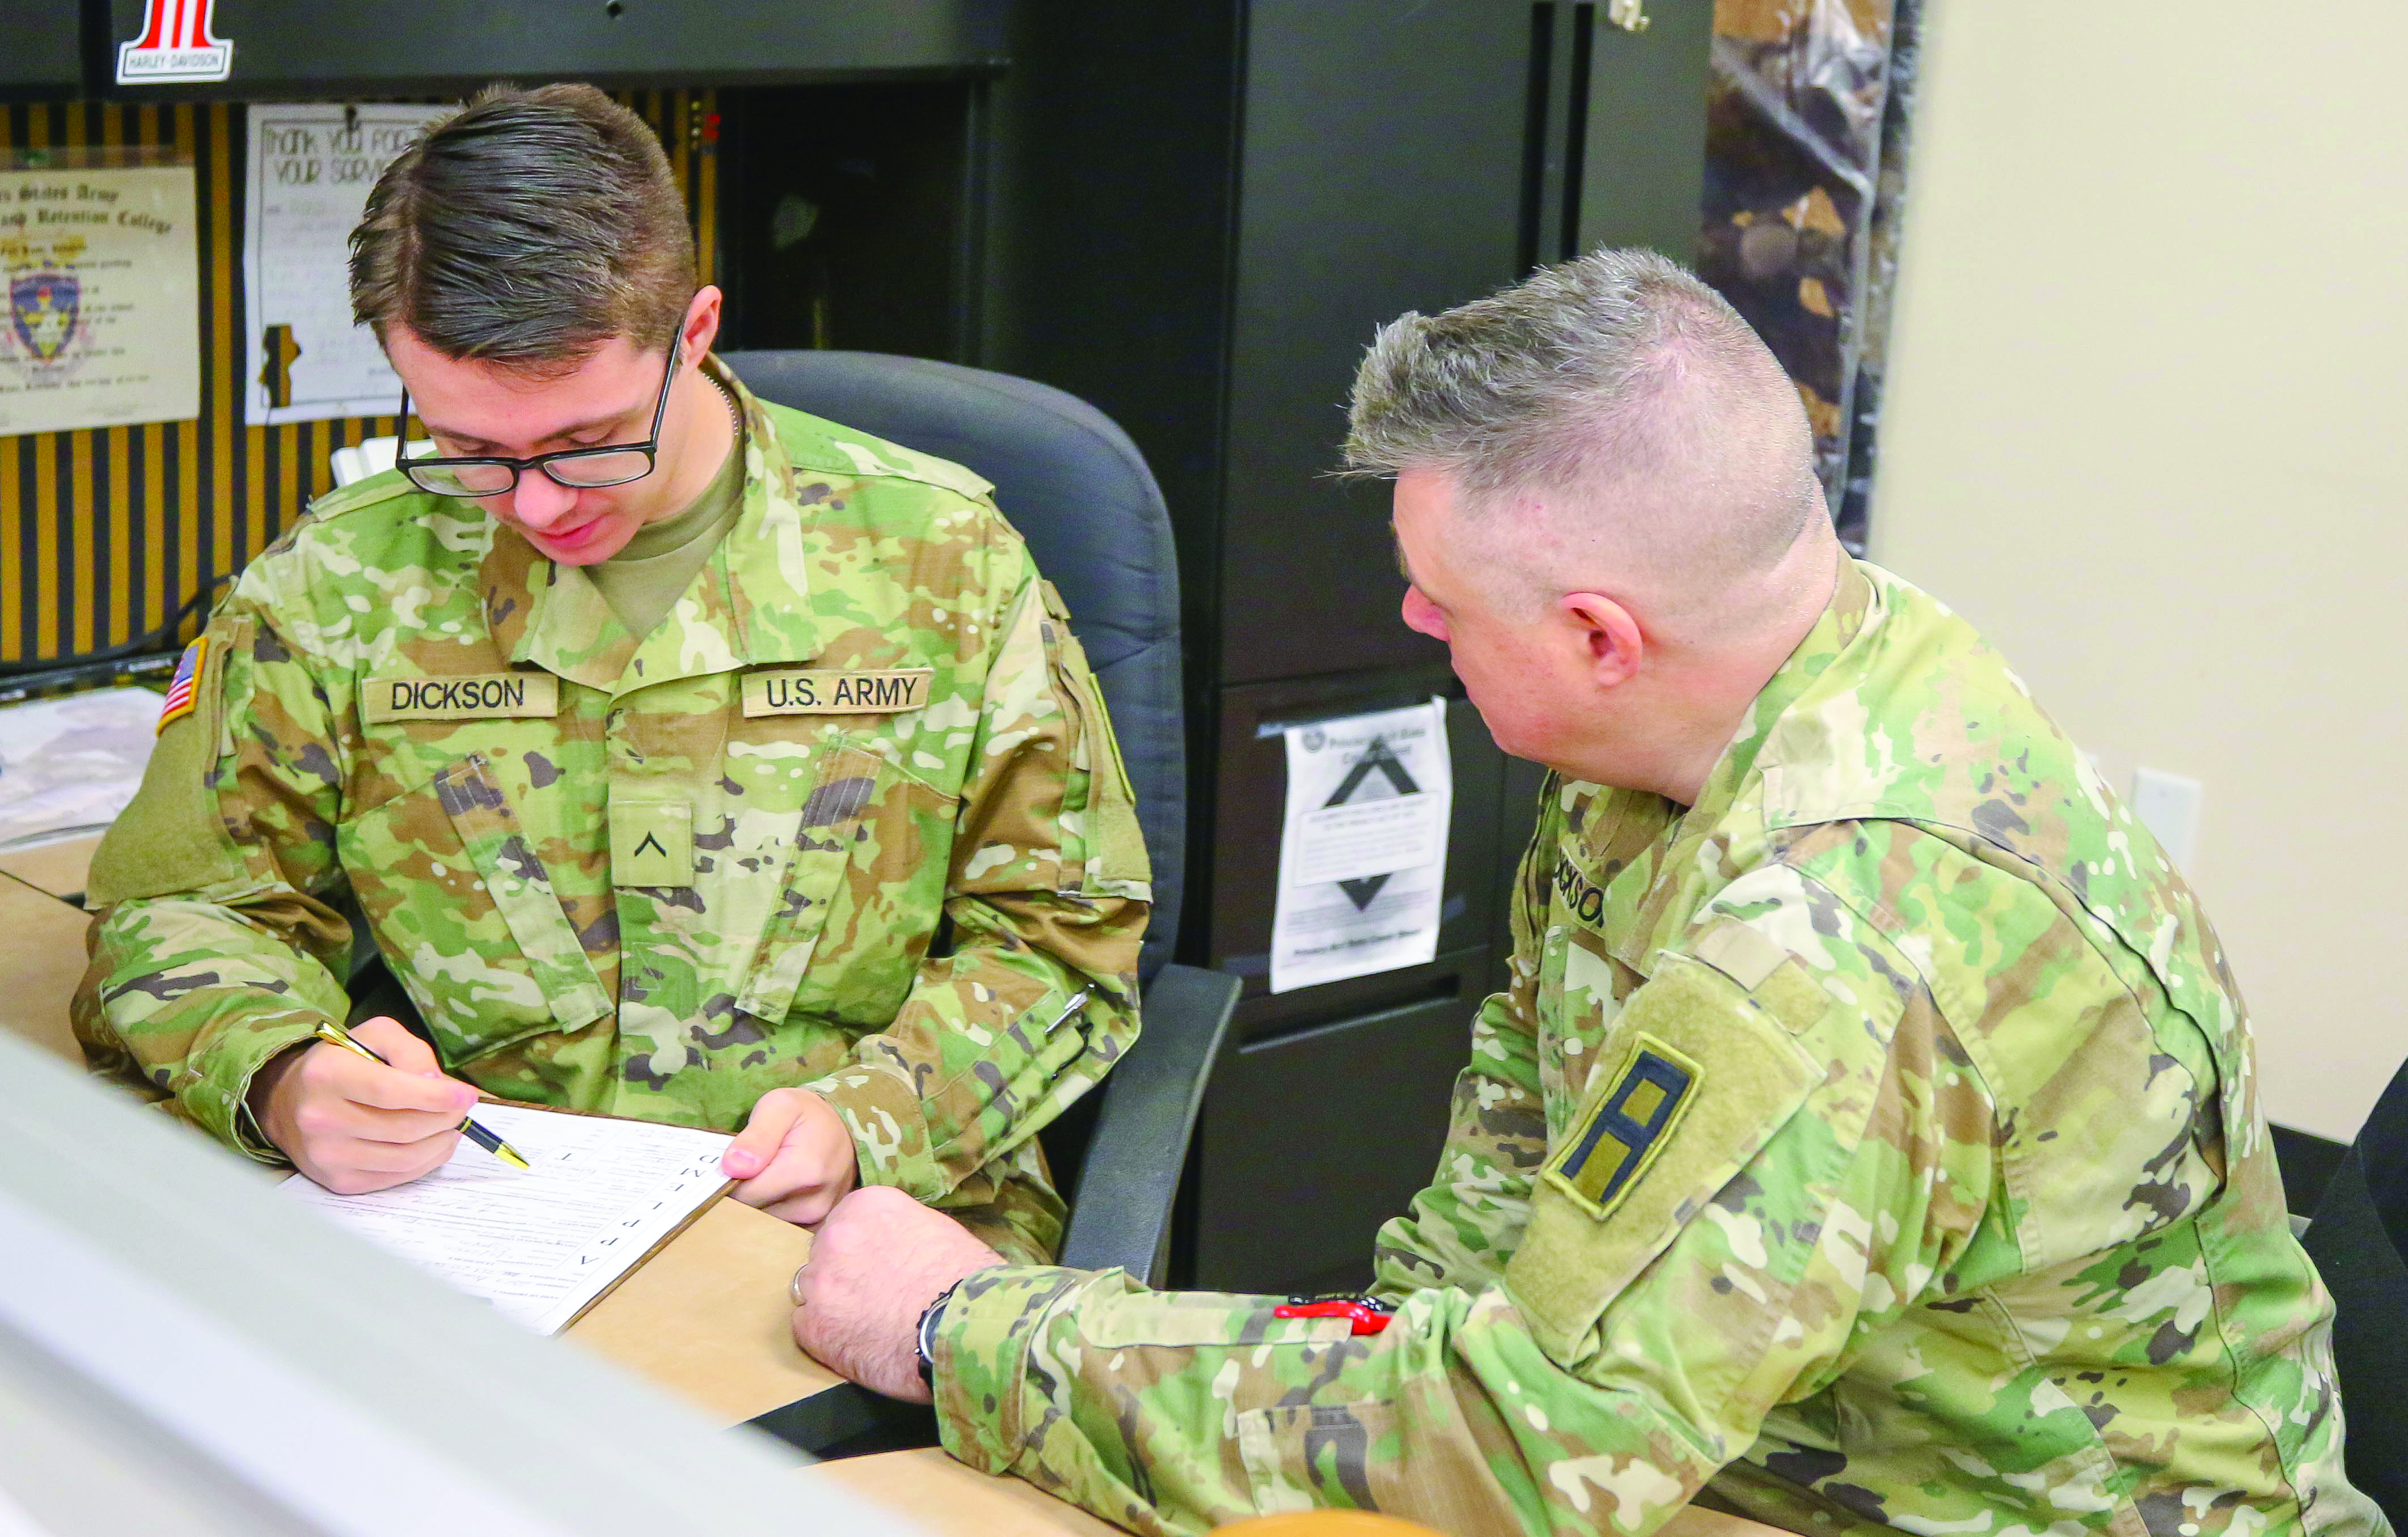 PVT Alexander Dickson (left), a small arms/towed artillery repairer taking part in the U.S. Army’s Hometown Recruiter Assistant Program at the Lacey Recruiting Station in Lacey, WA, discusses his duties with his father, SFC Nathan Dickson (right), a paralegal NCO assigned to HHC, 189th Infantry Brigade, First Army Divi - sion West on 30 November 2023. (Credit: SFC Scott J. Evans)